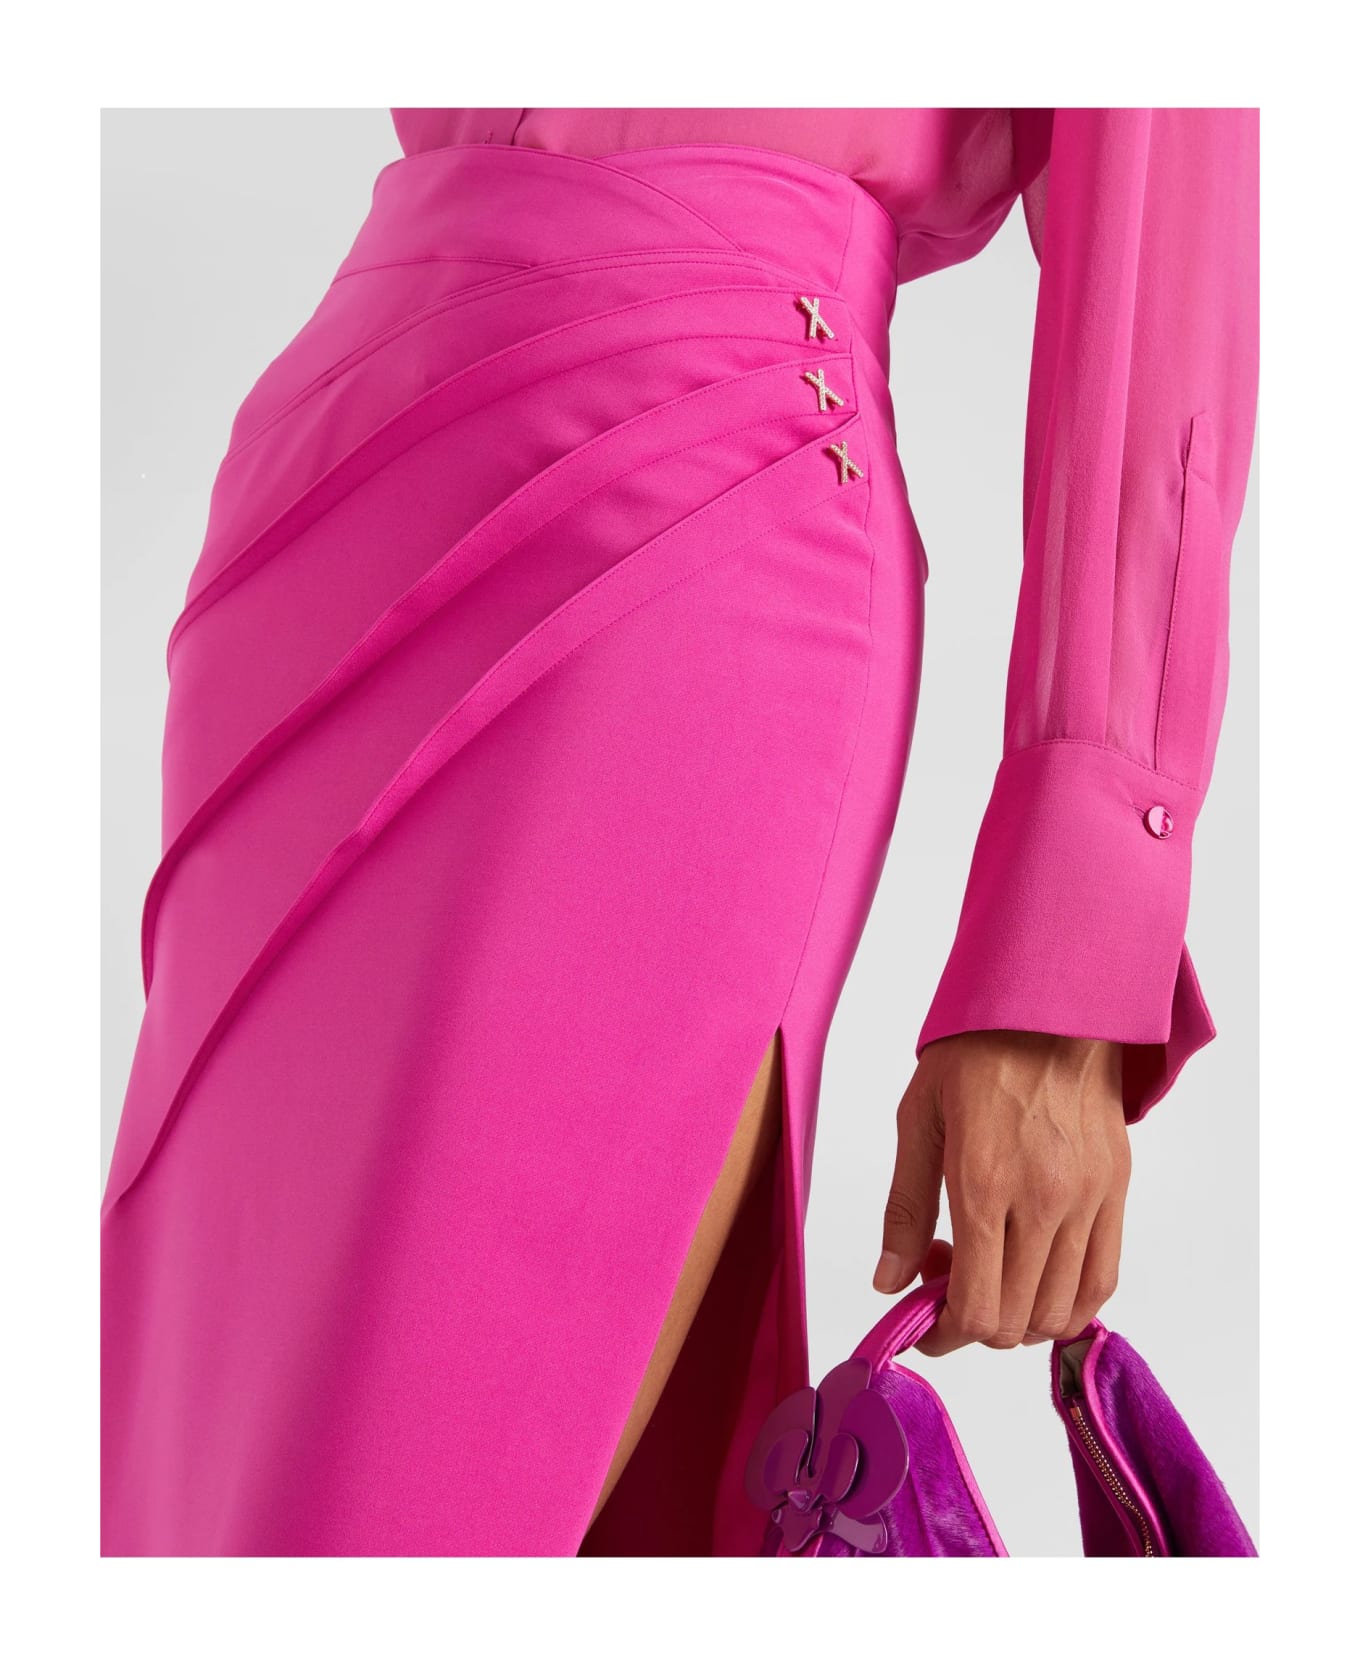 Genny Long Skirt With Slit - Pink